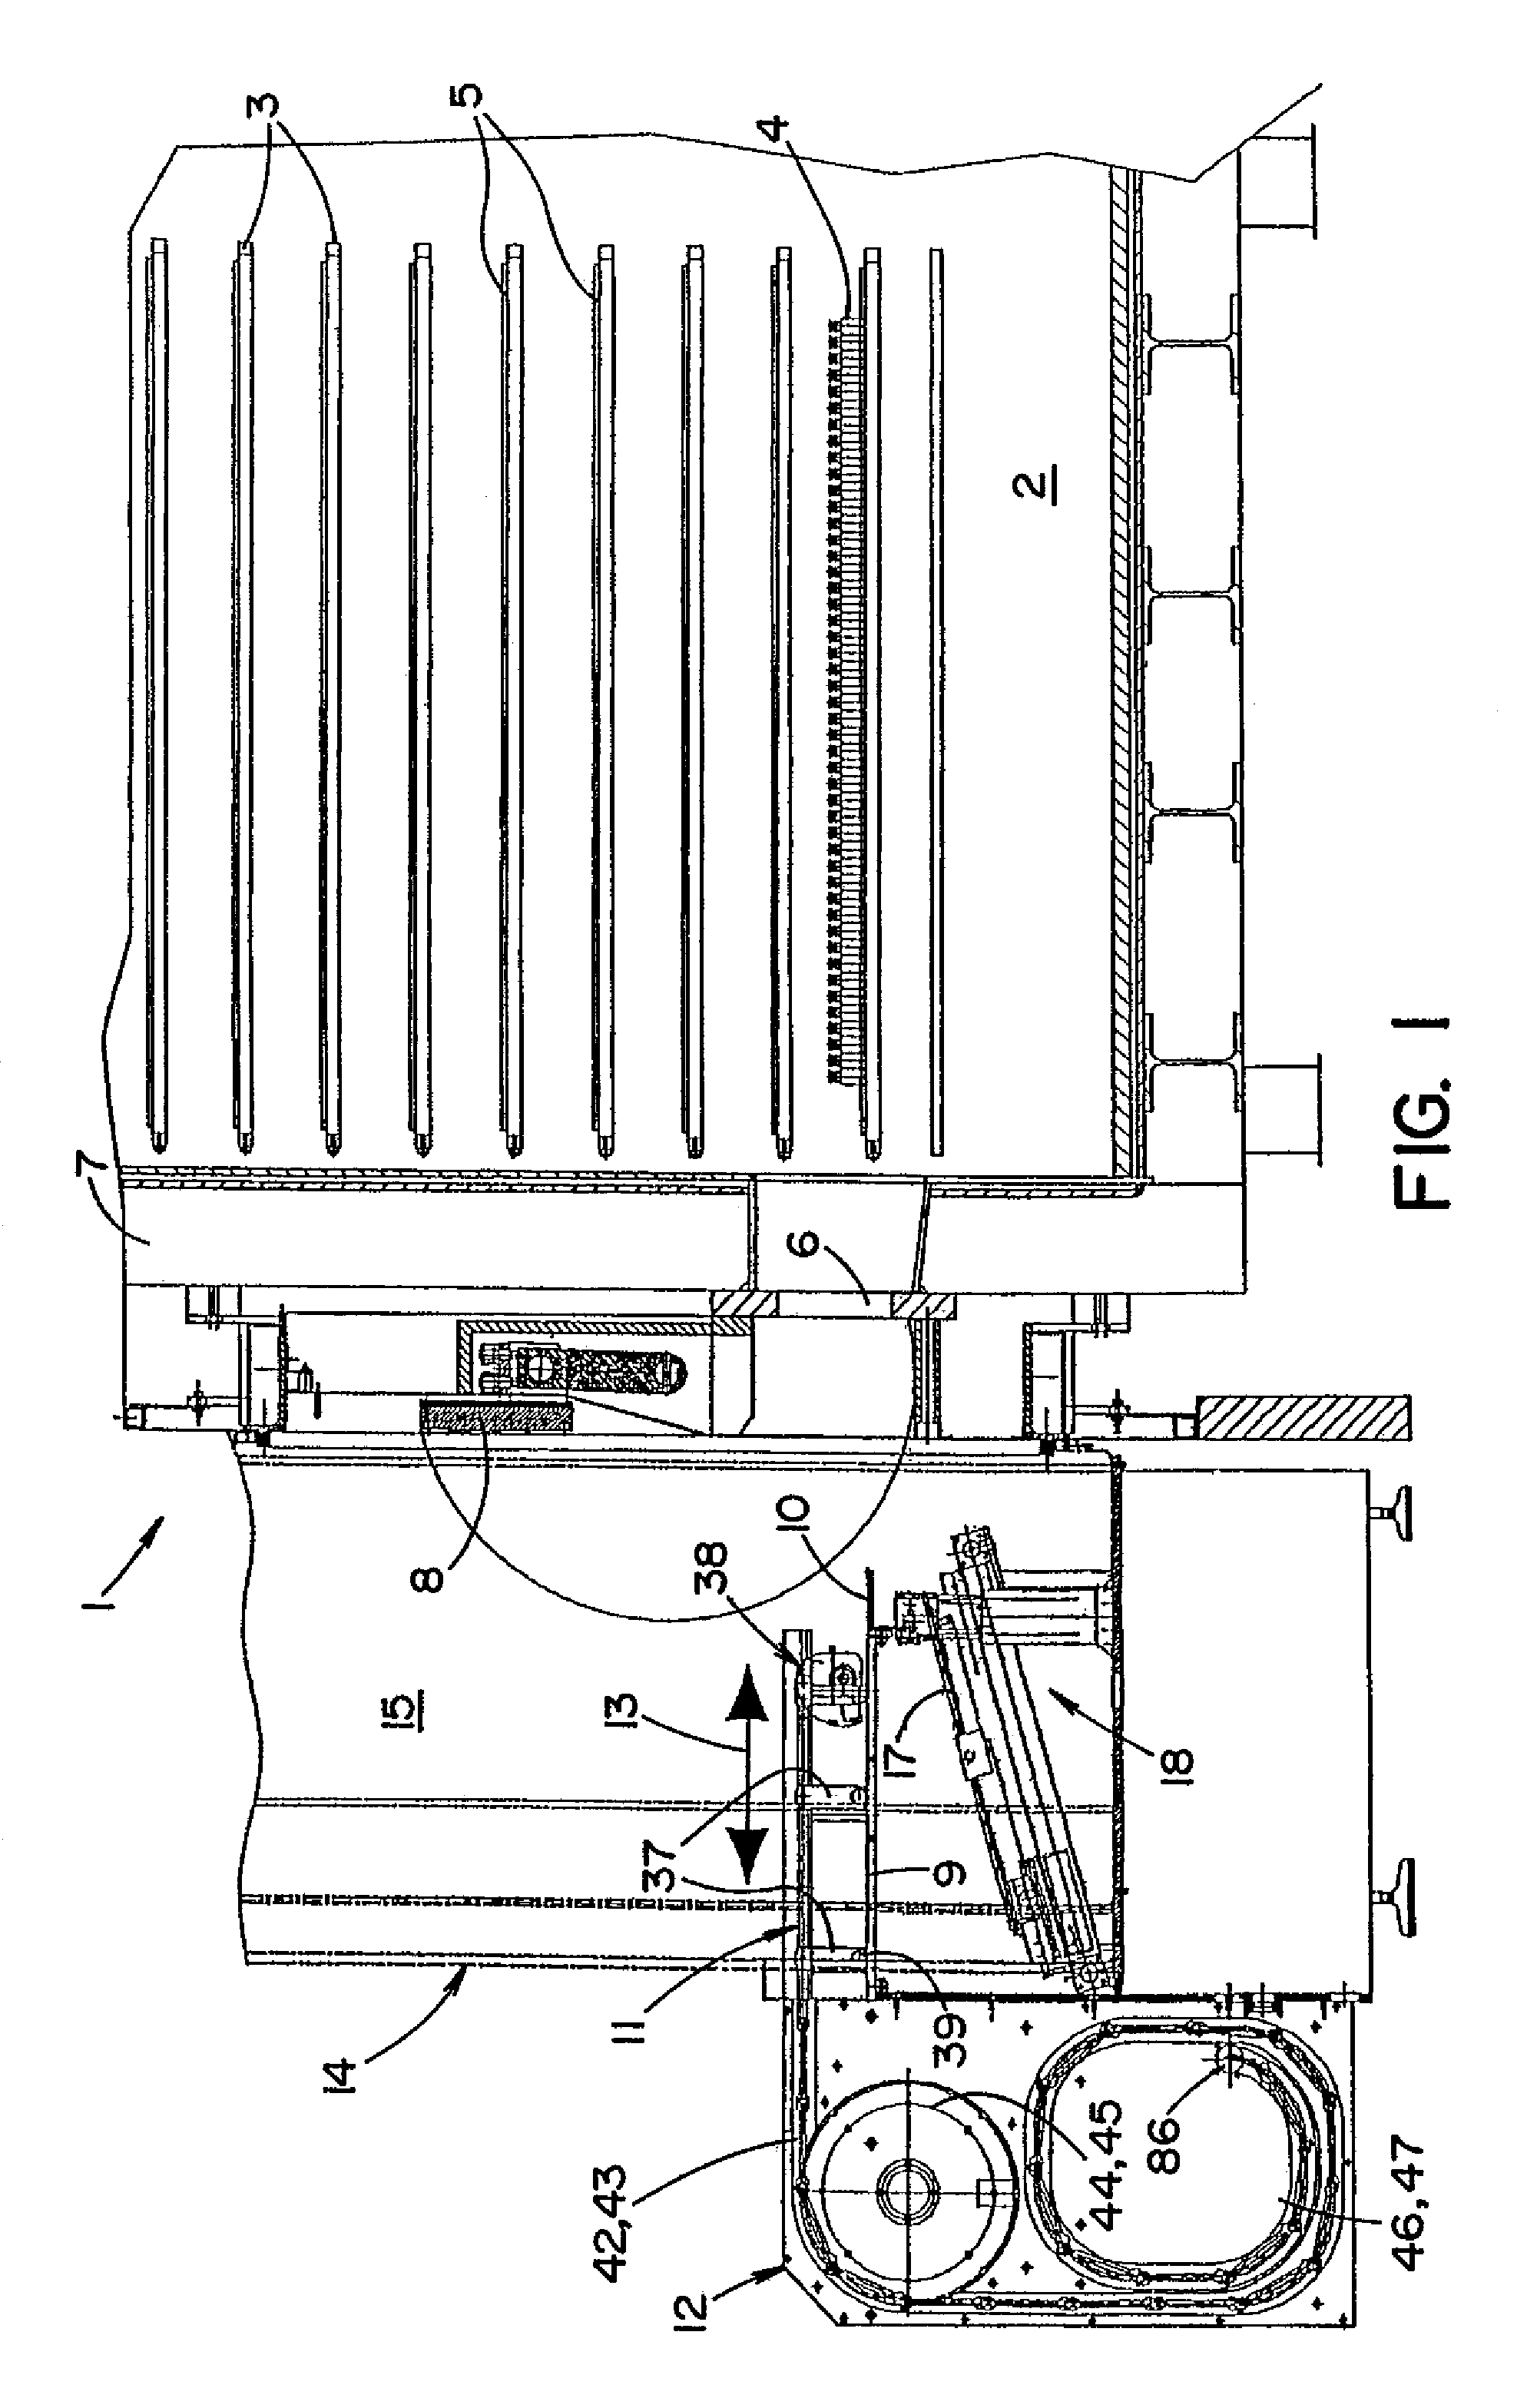 Apparatus for loading and unloading freeze-drying chambers